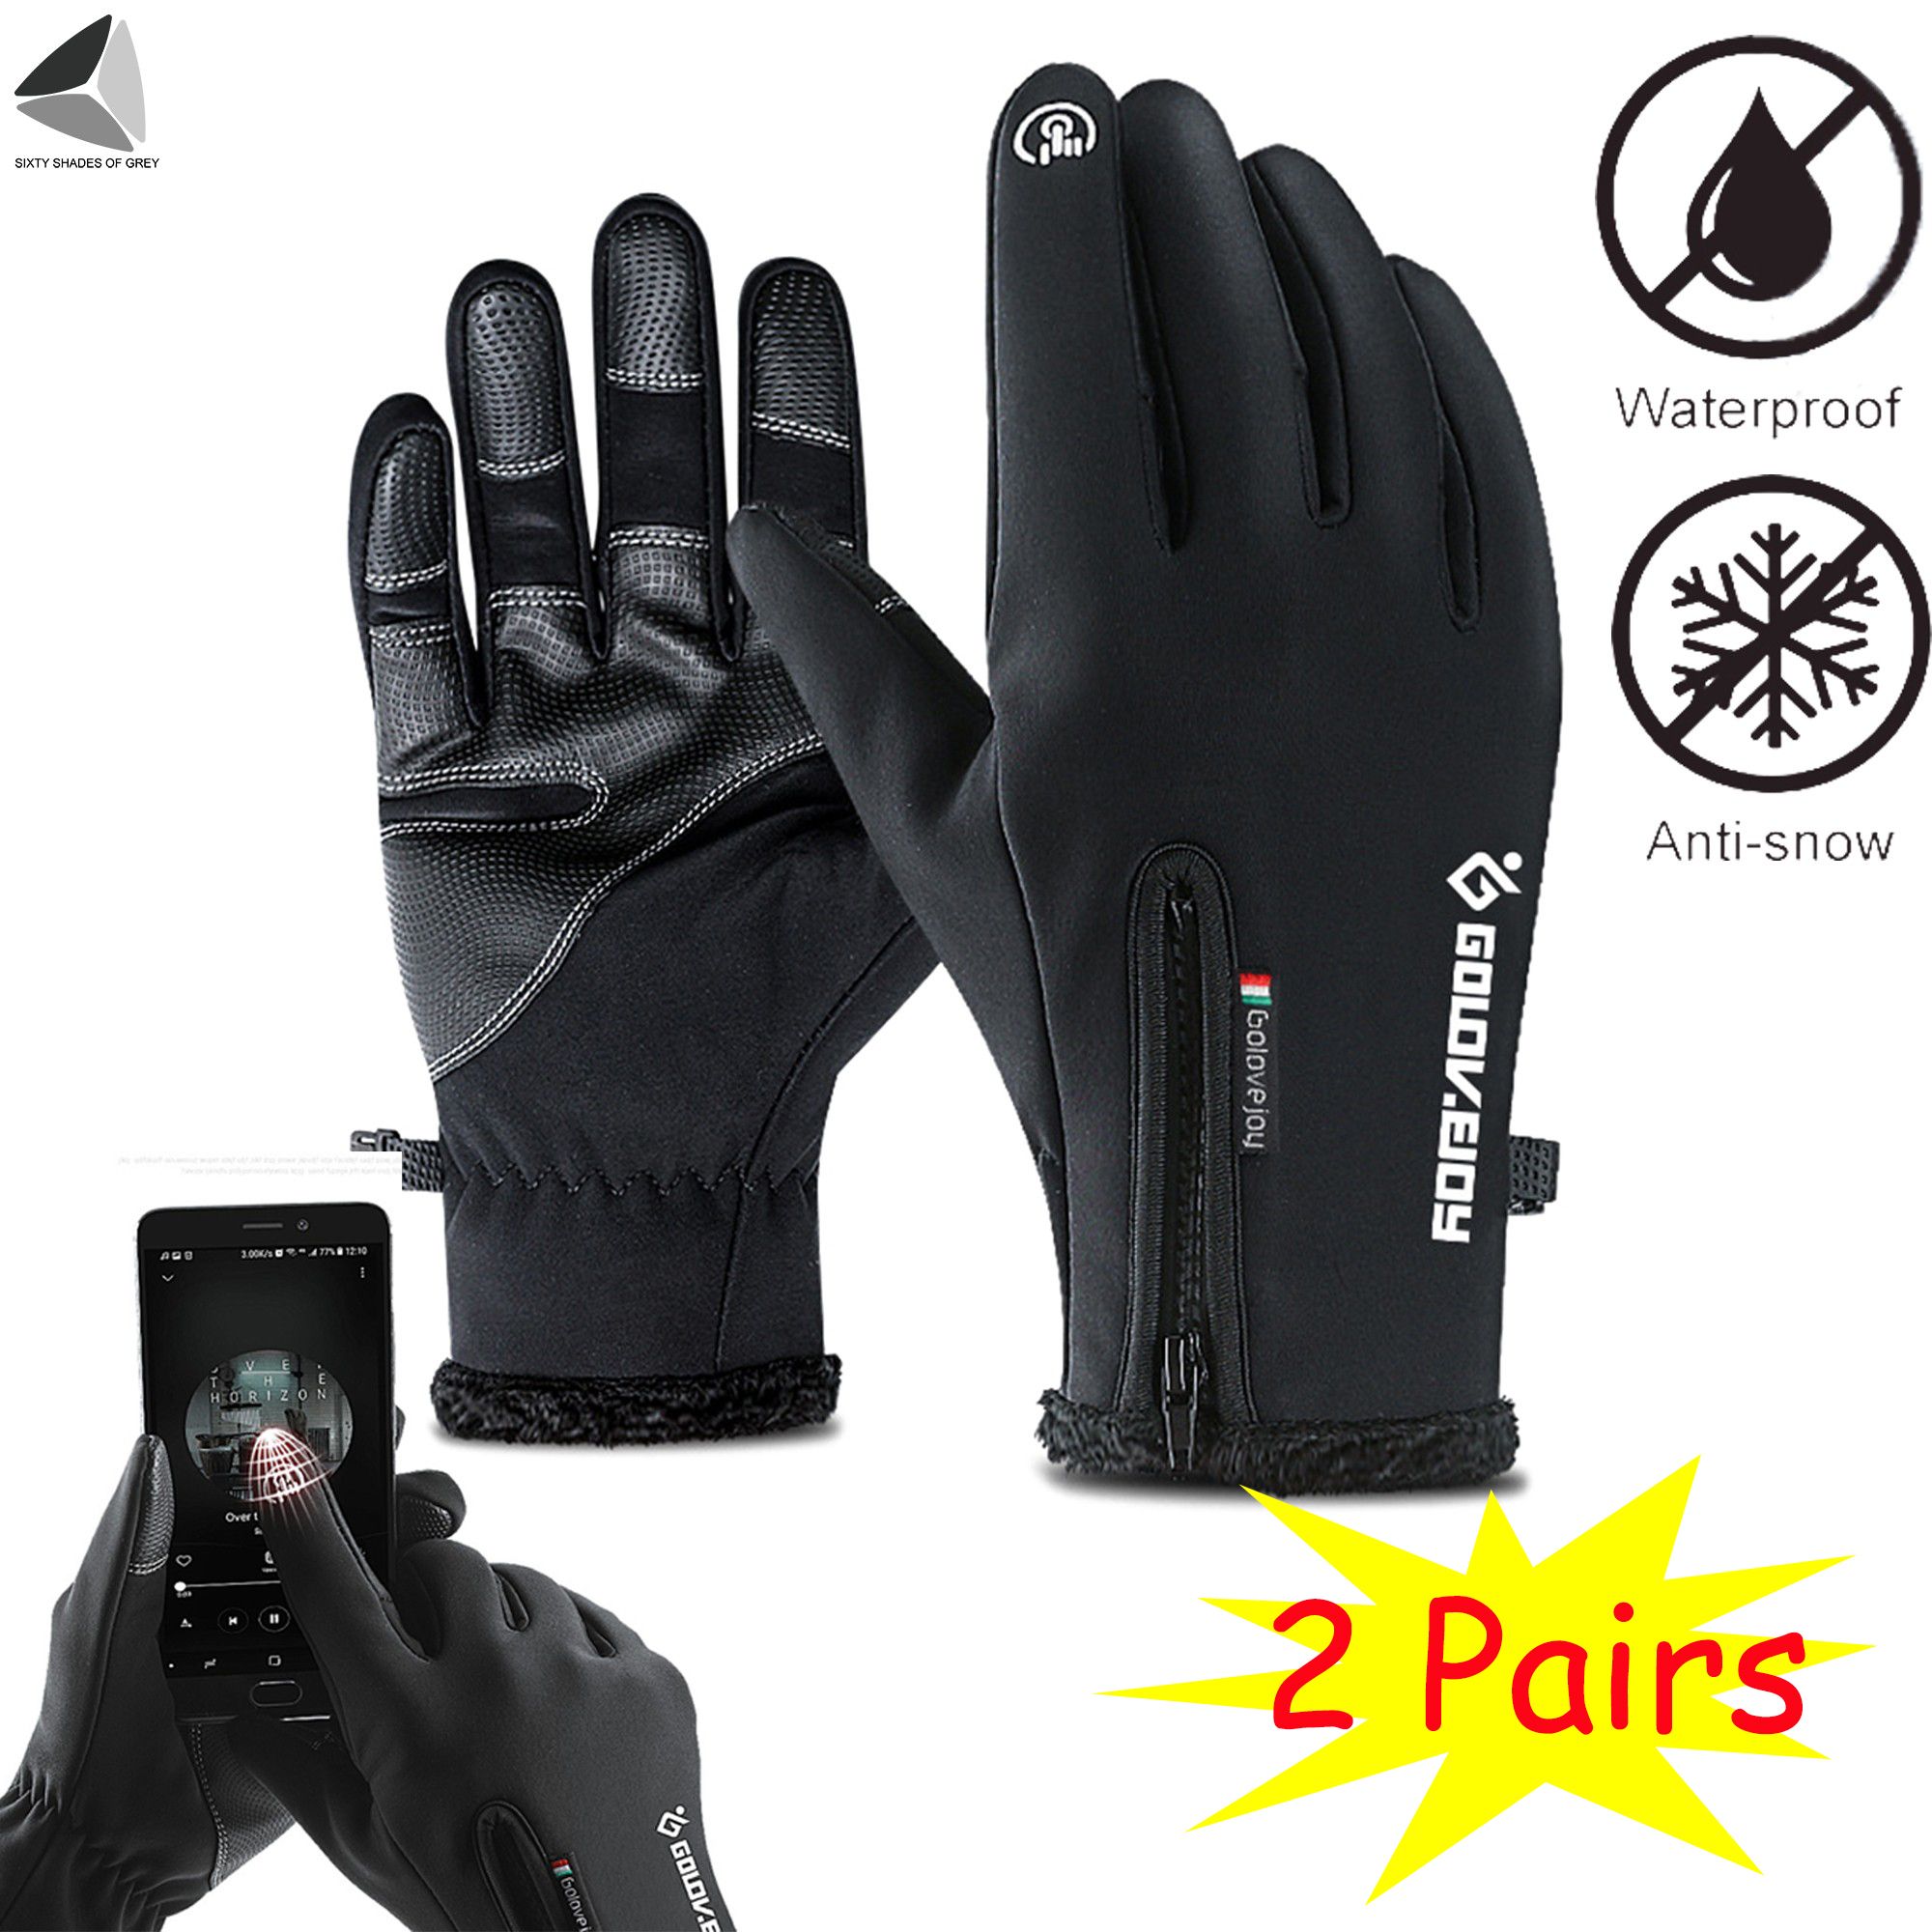 PULLIMORE 2 Pairs Winter Warm Gloves for Men Women Waterproof Touchscreen Gloves Non-Slip Mittens for Skiing Driving Cycling Running (2XL, Black) - image 1 of 9